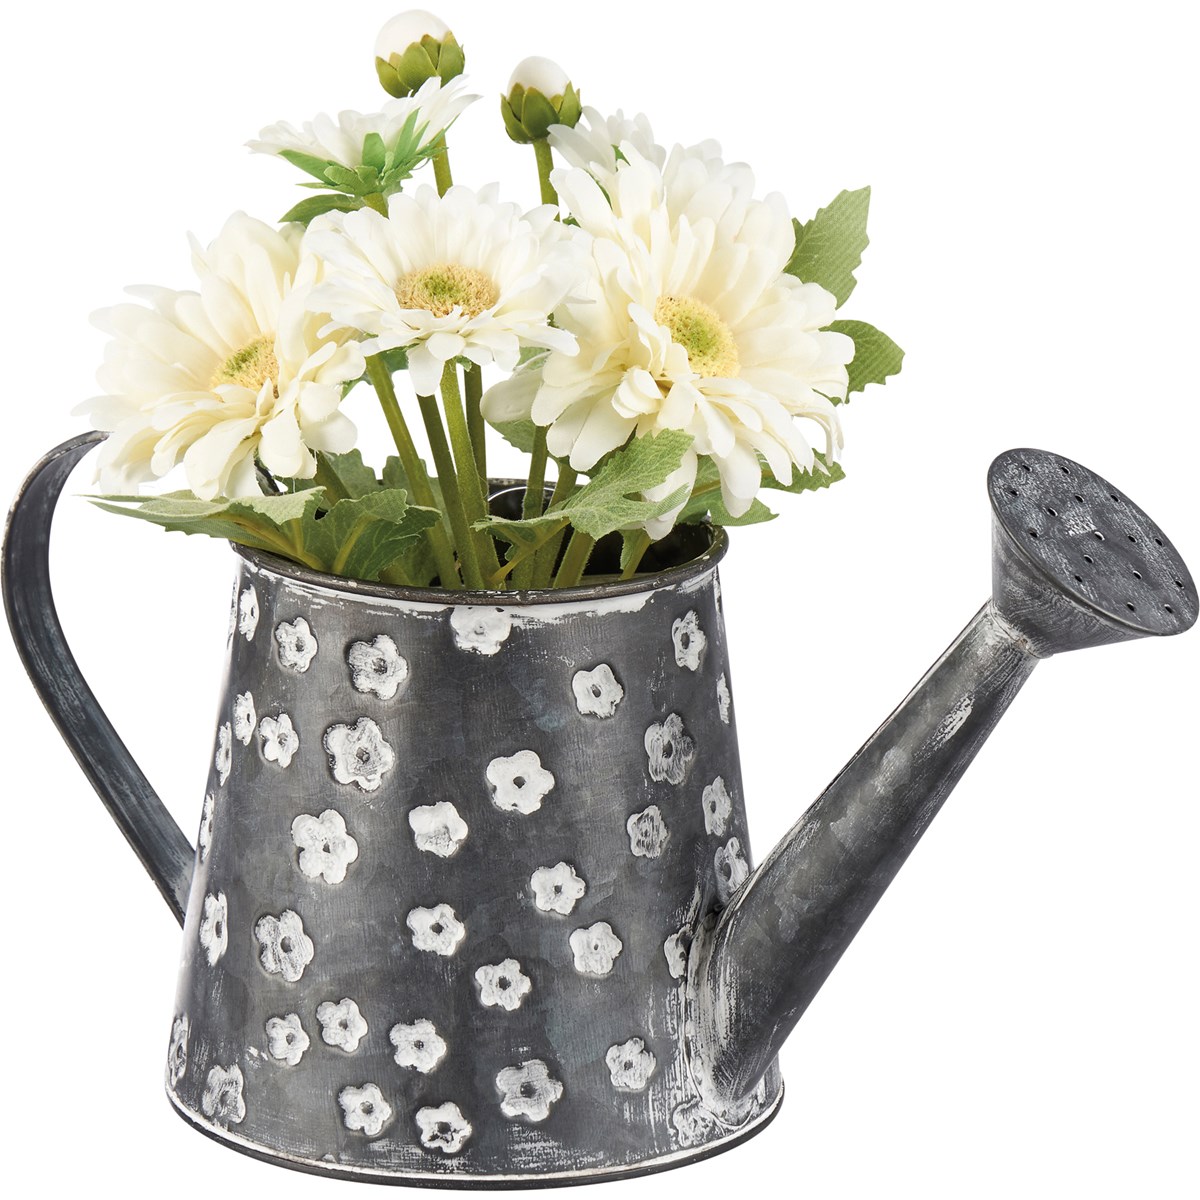 Daisy Watering Can - Metal